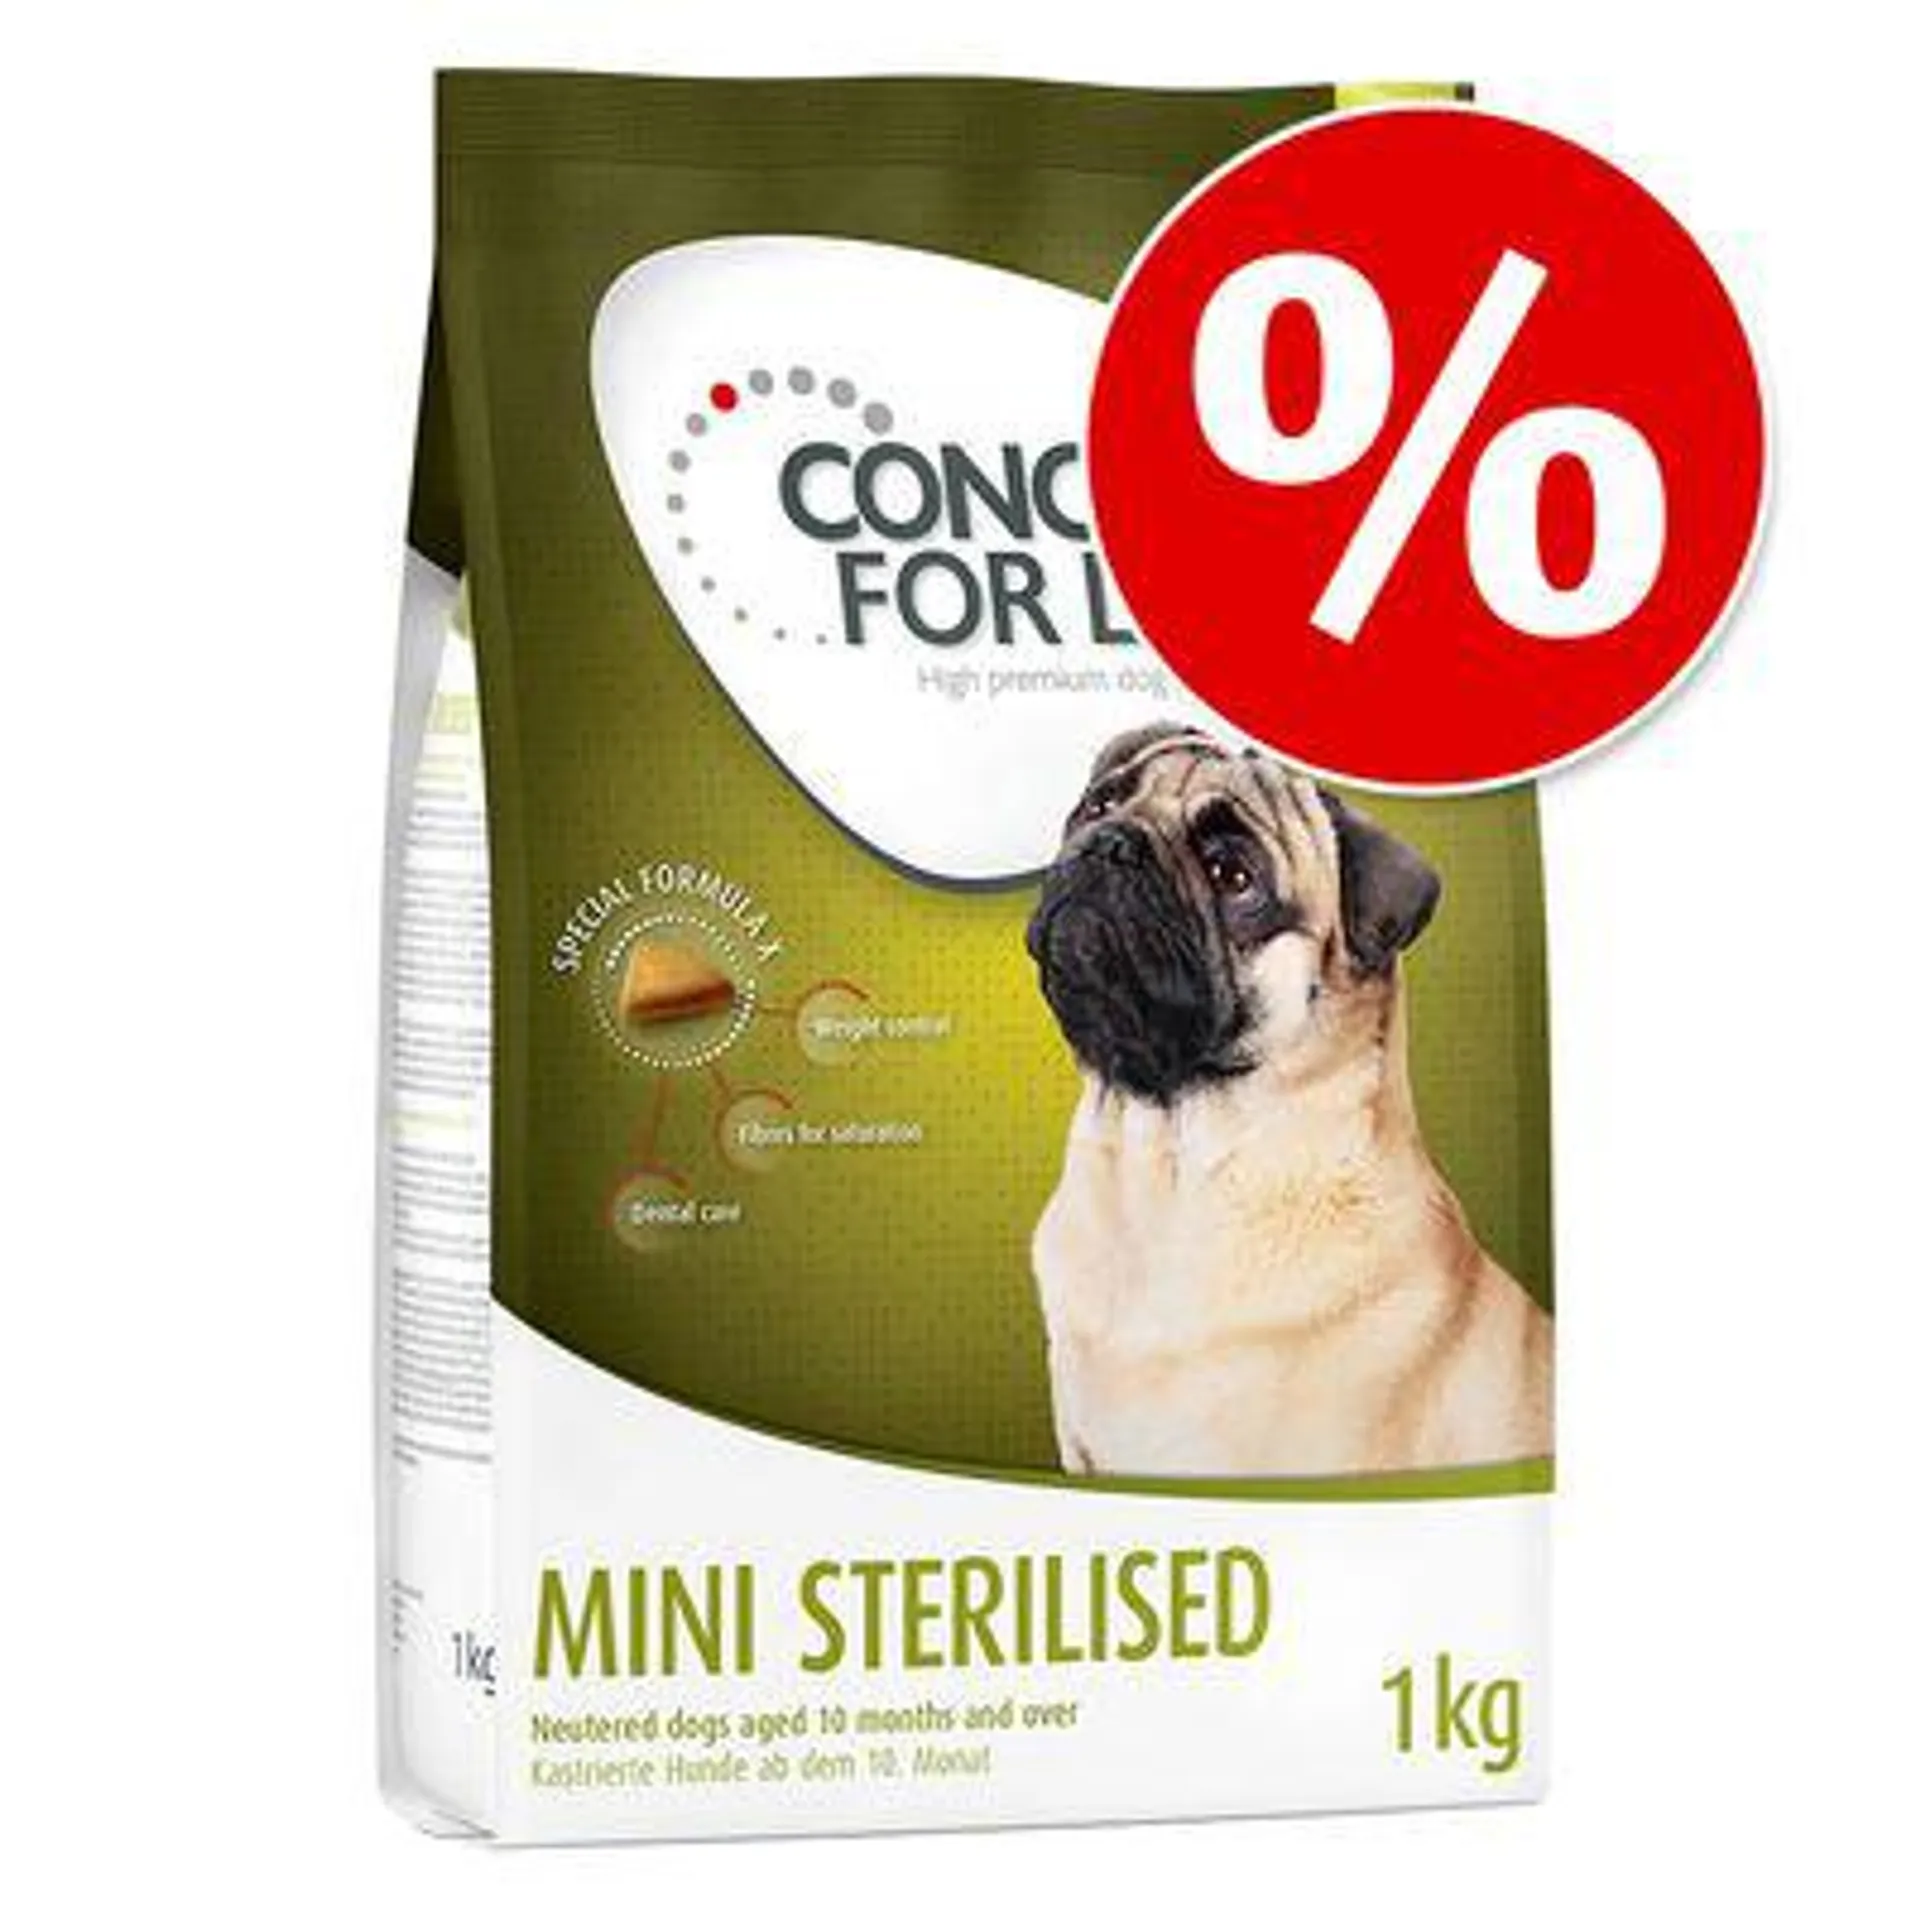 4 x 1kg/1.5kg Concept for Life Dry Dog Food - Special Price!*